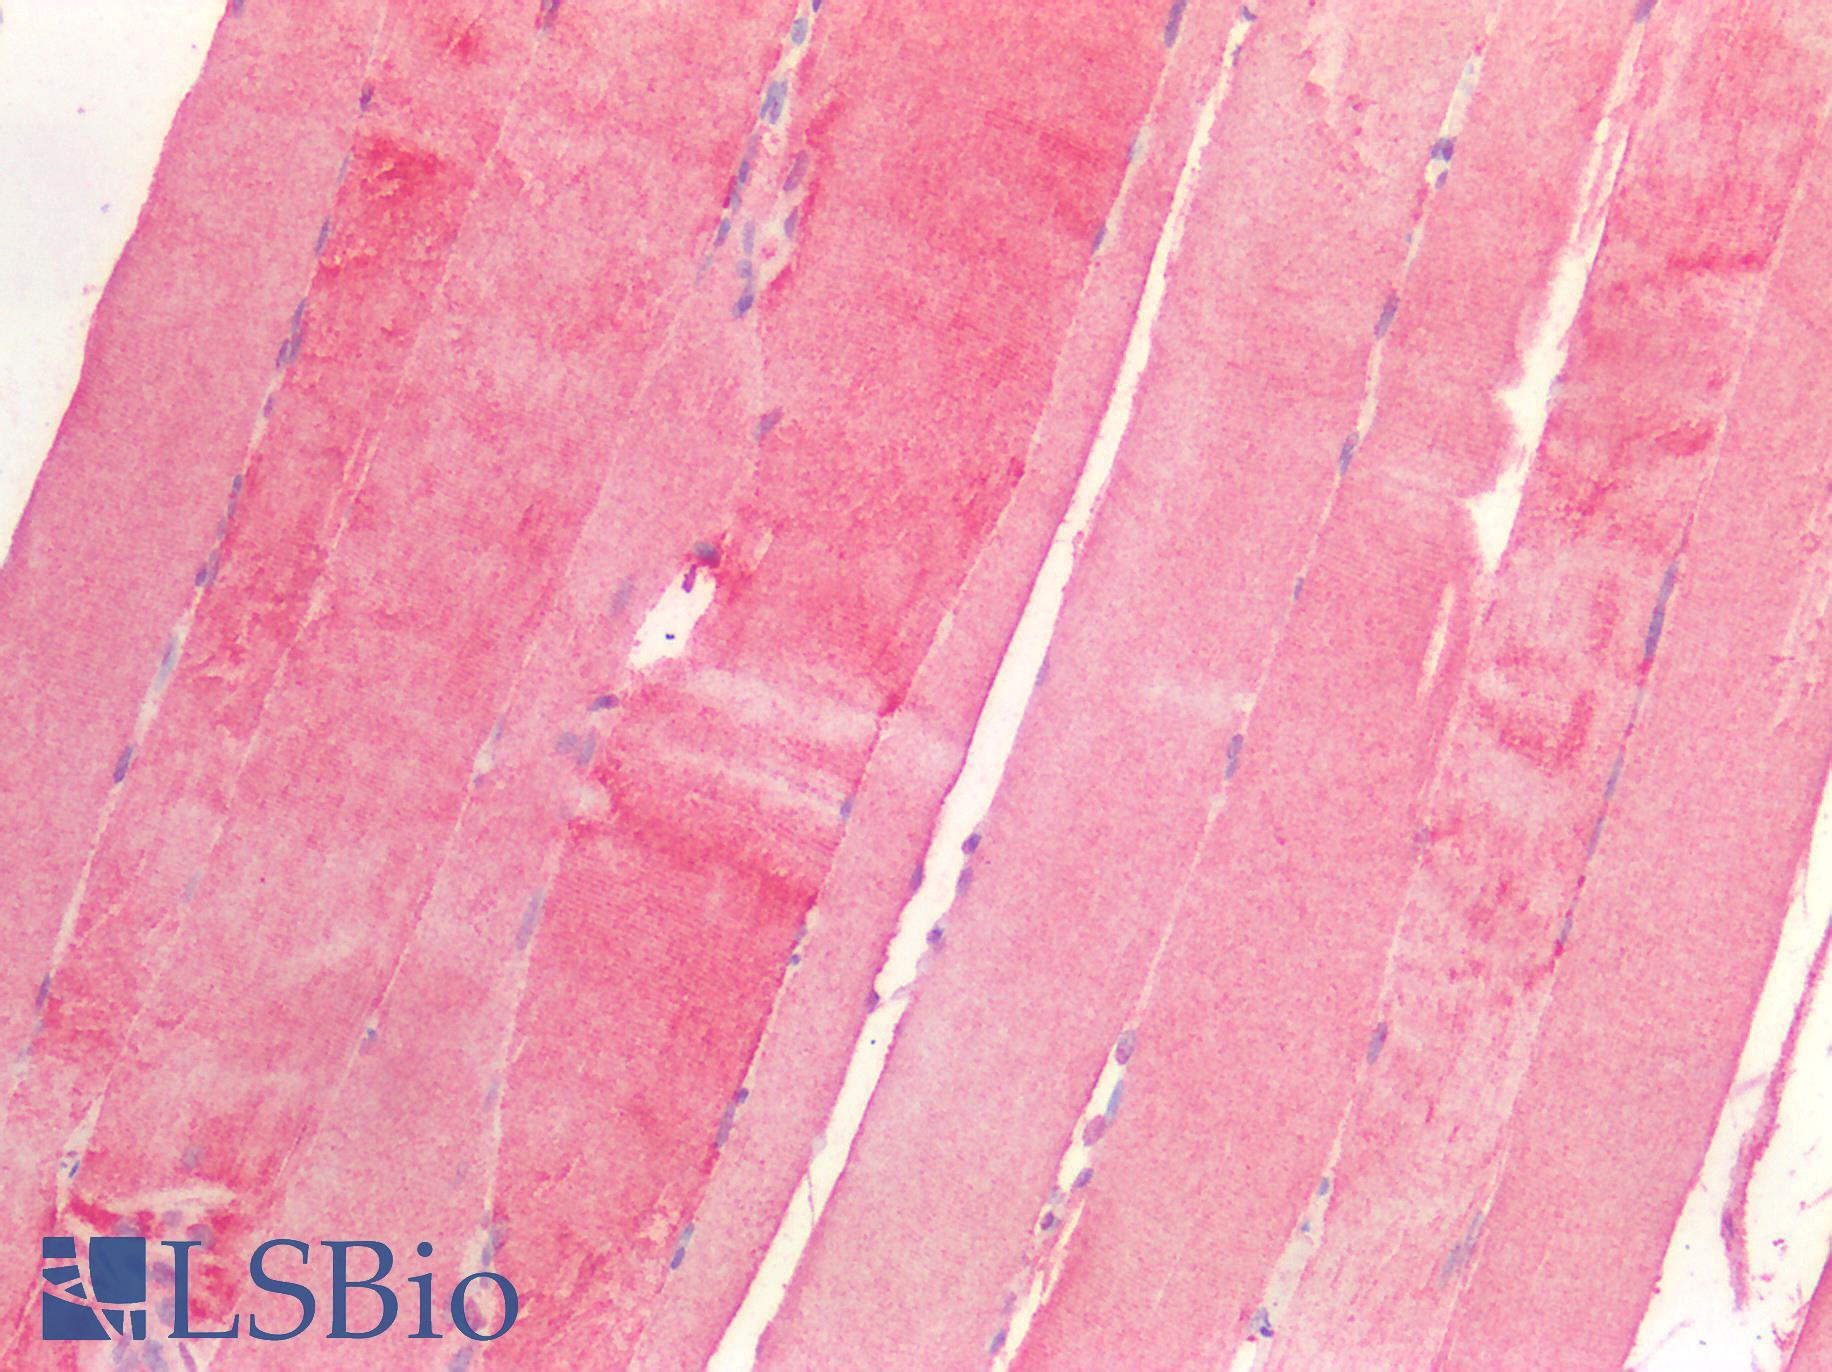 P4HA1 Antibody - Human Skeletal Muscle: Formalin-Fixed, Paraffin-Embedded (FFPE)